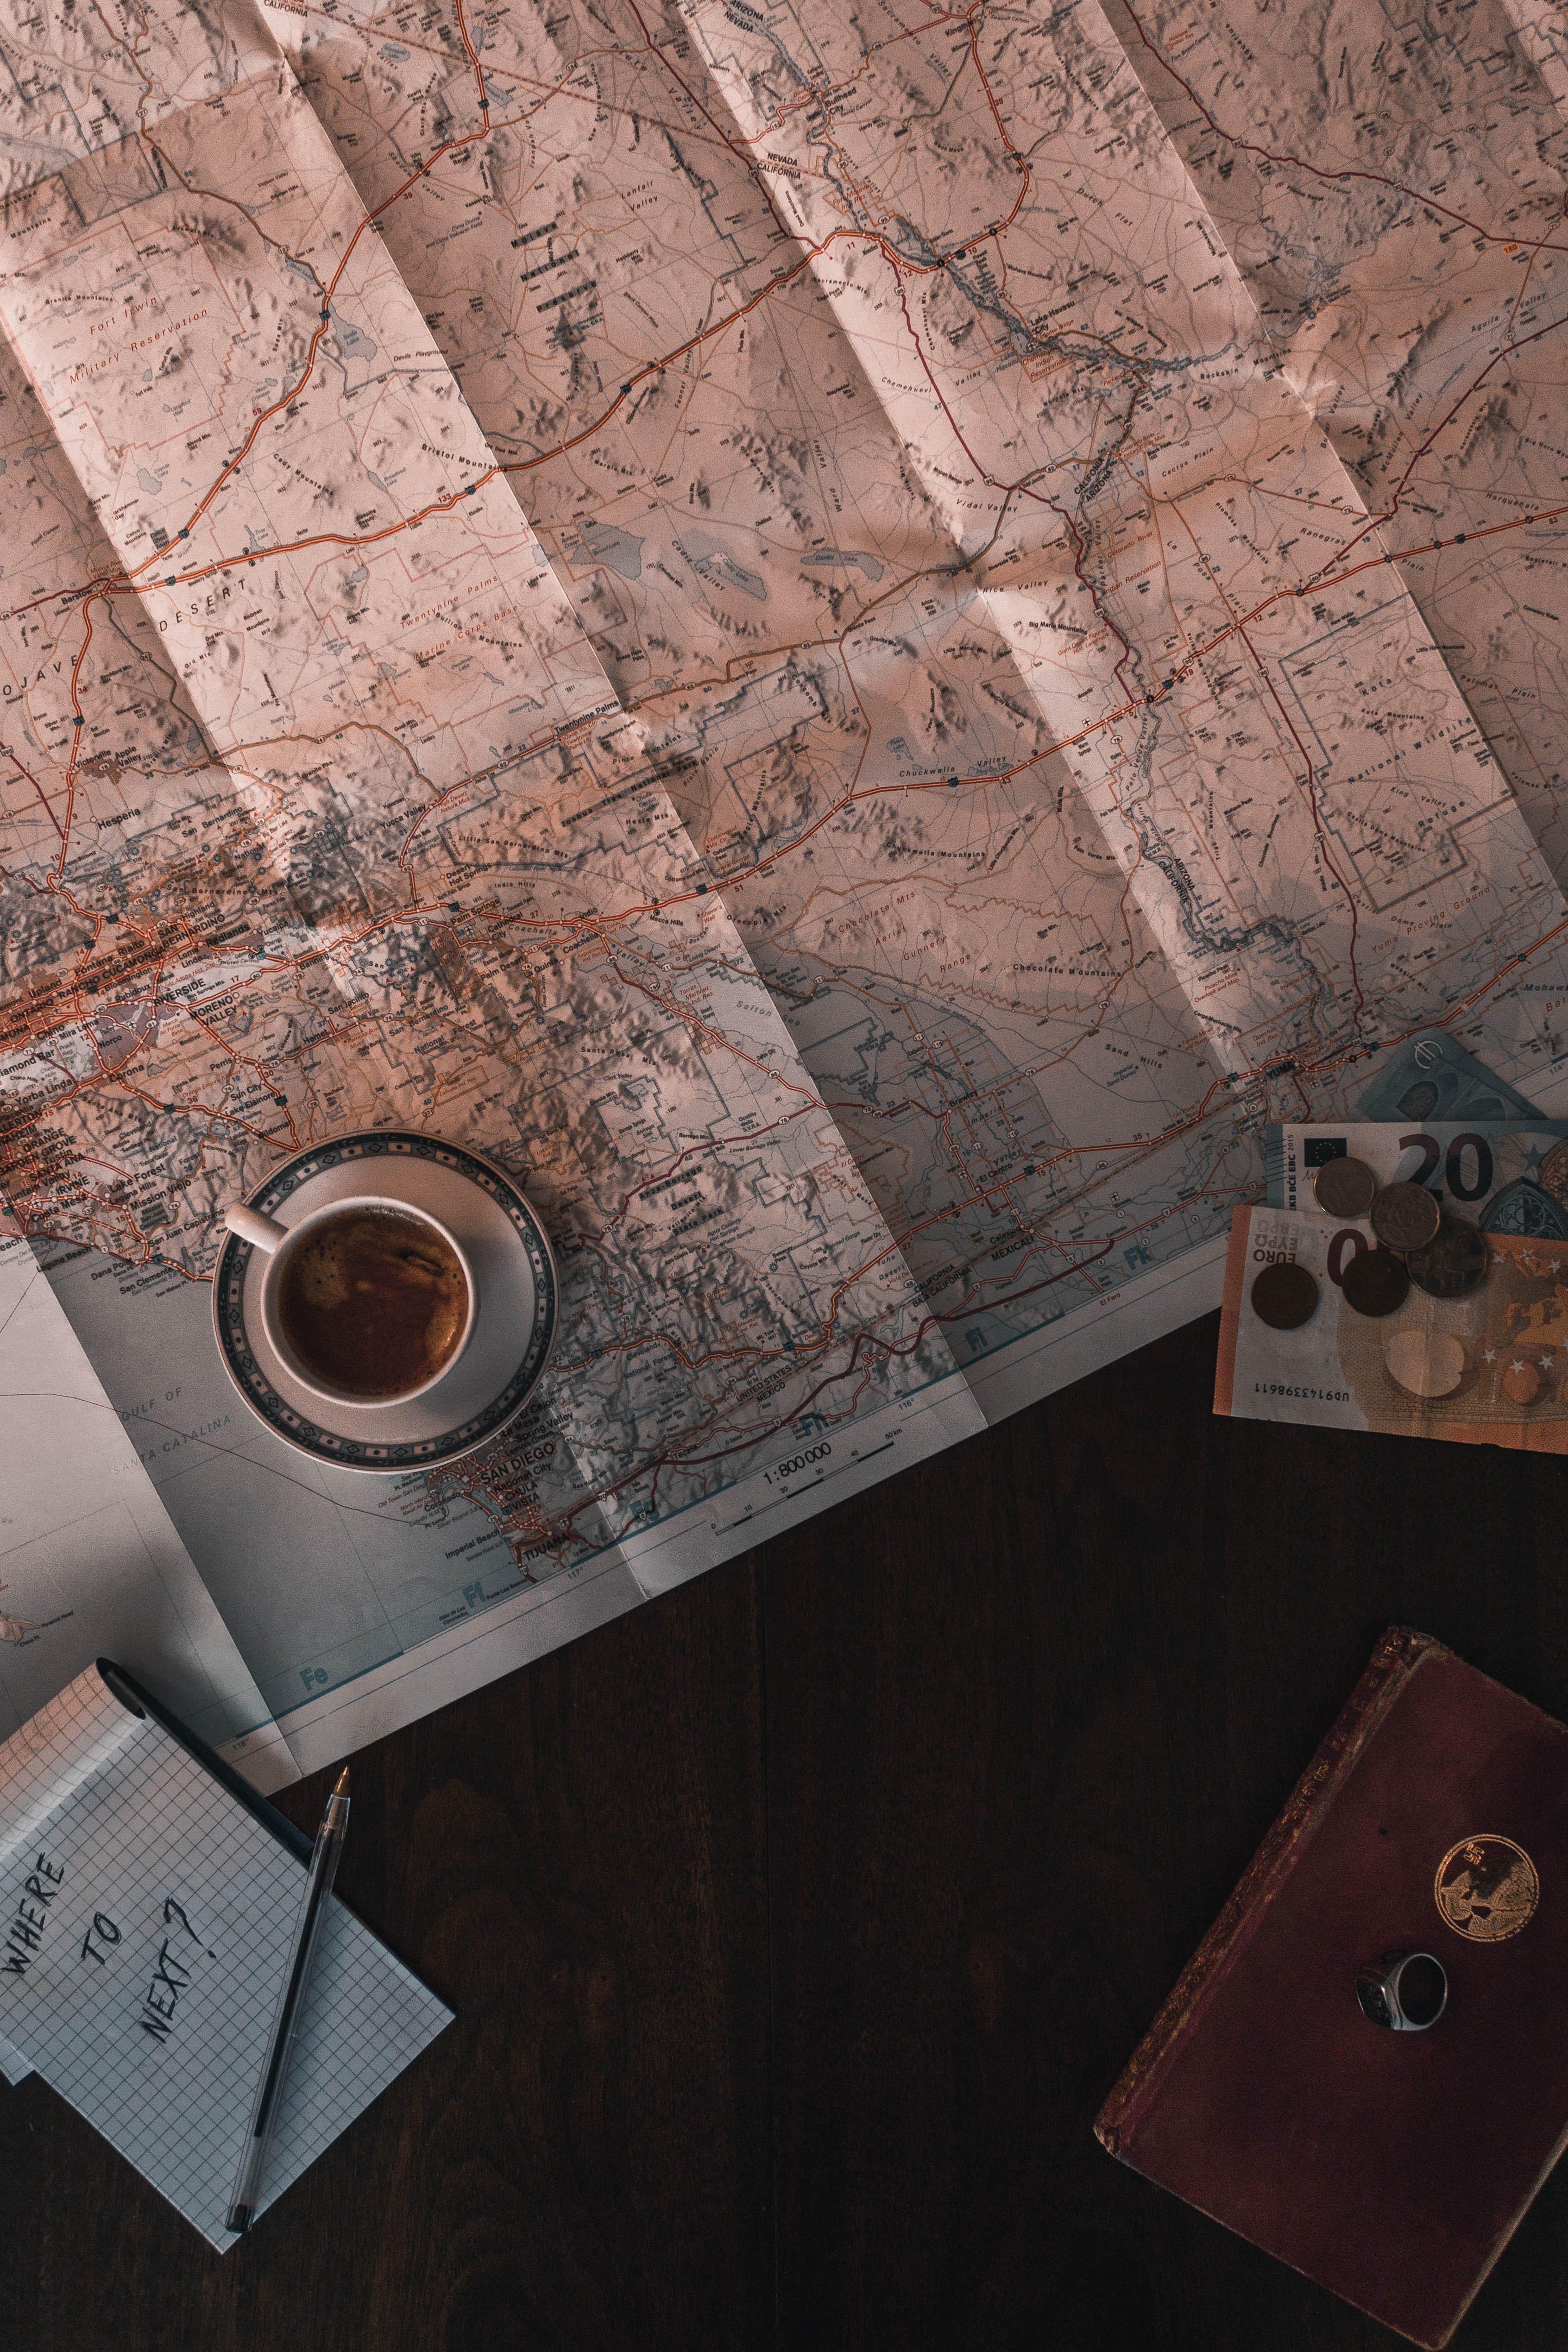 Image of a cup of tea sitting in the corner of a map spread out on a table